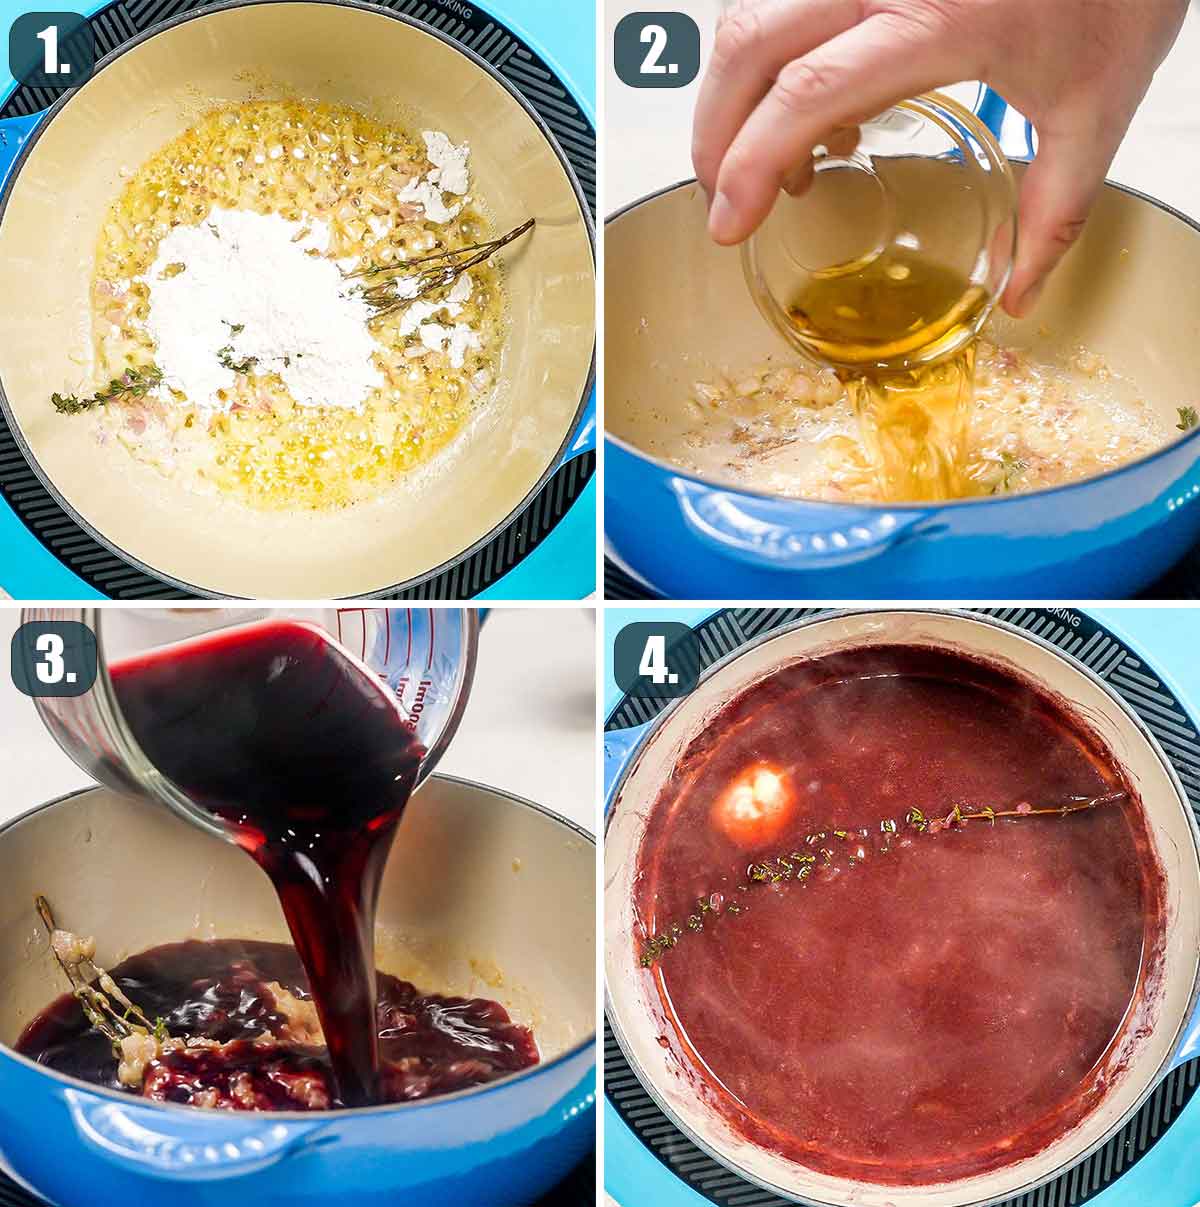 process shots showing how to make red wine sauce.